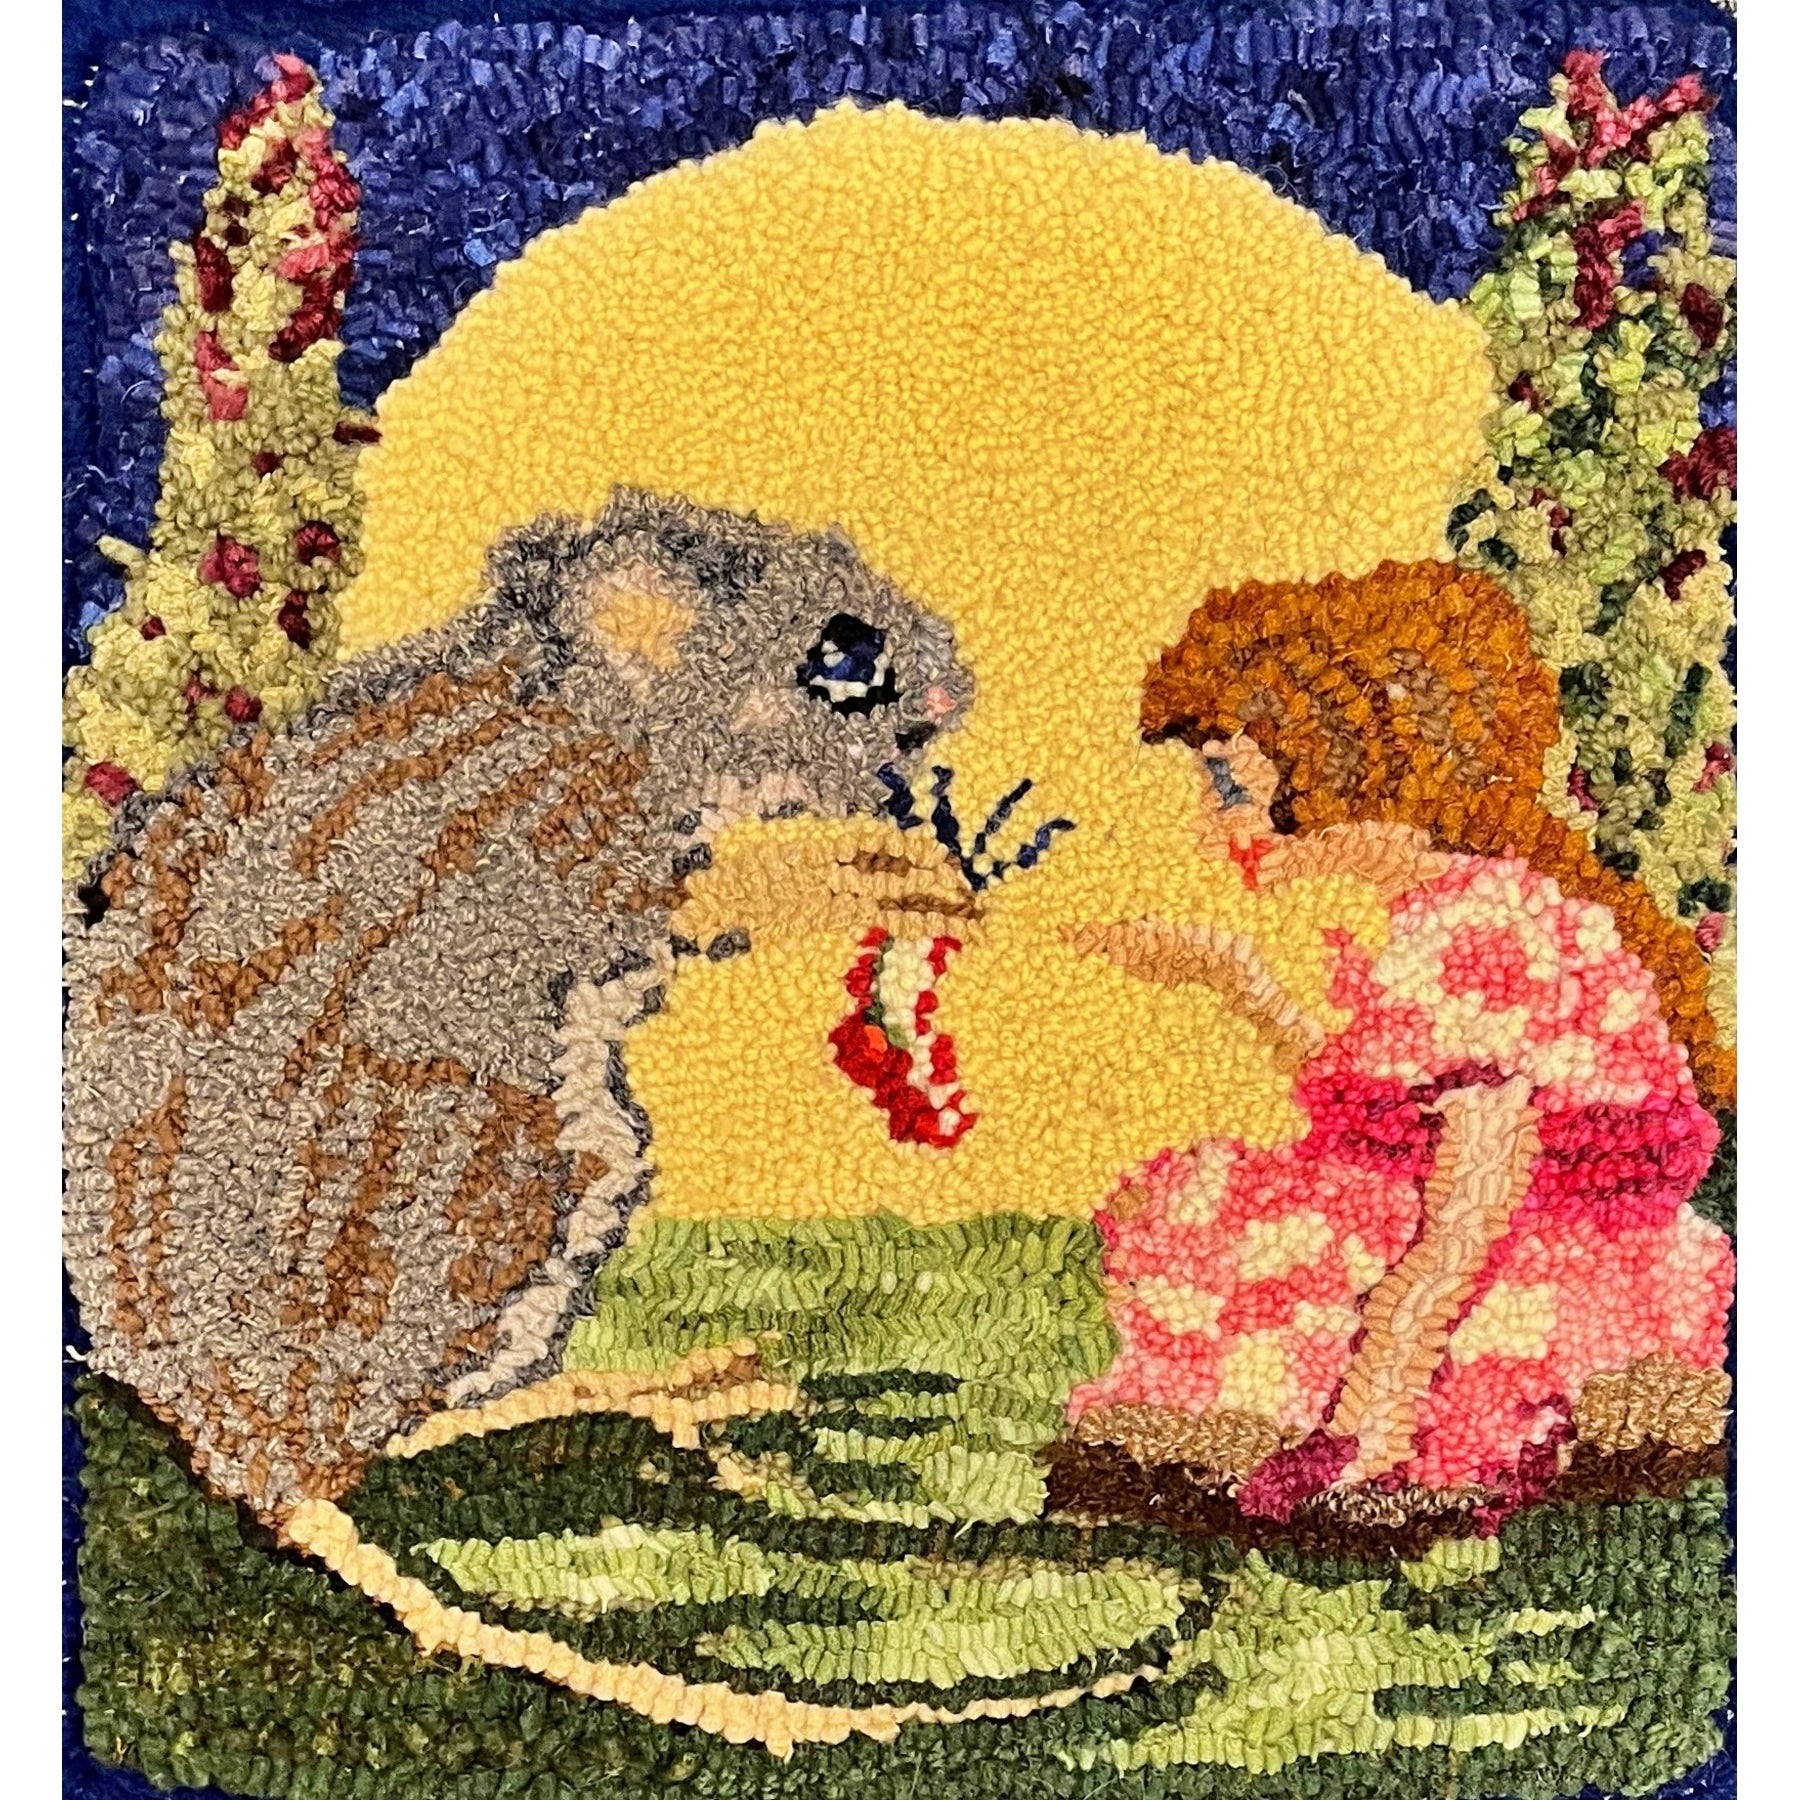 Thumbelina came to live with the Field mouse from Thumbelina, ill. Unkown, 1909, rug hooked by Sherrie Peterson